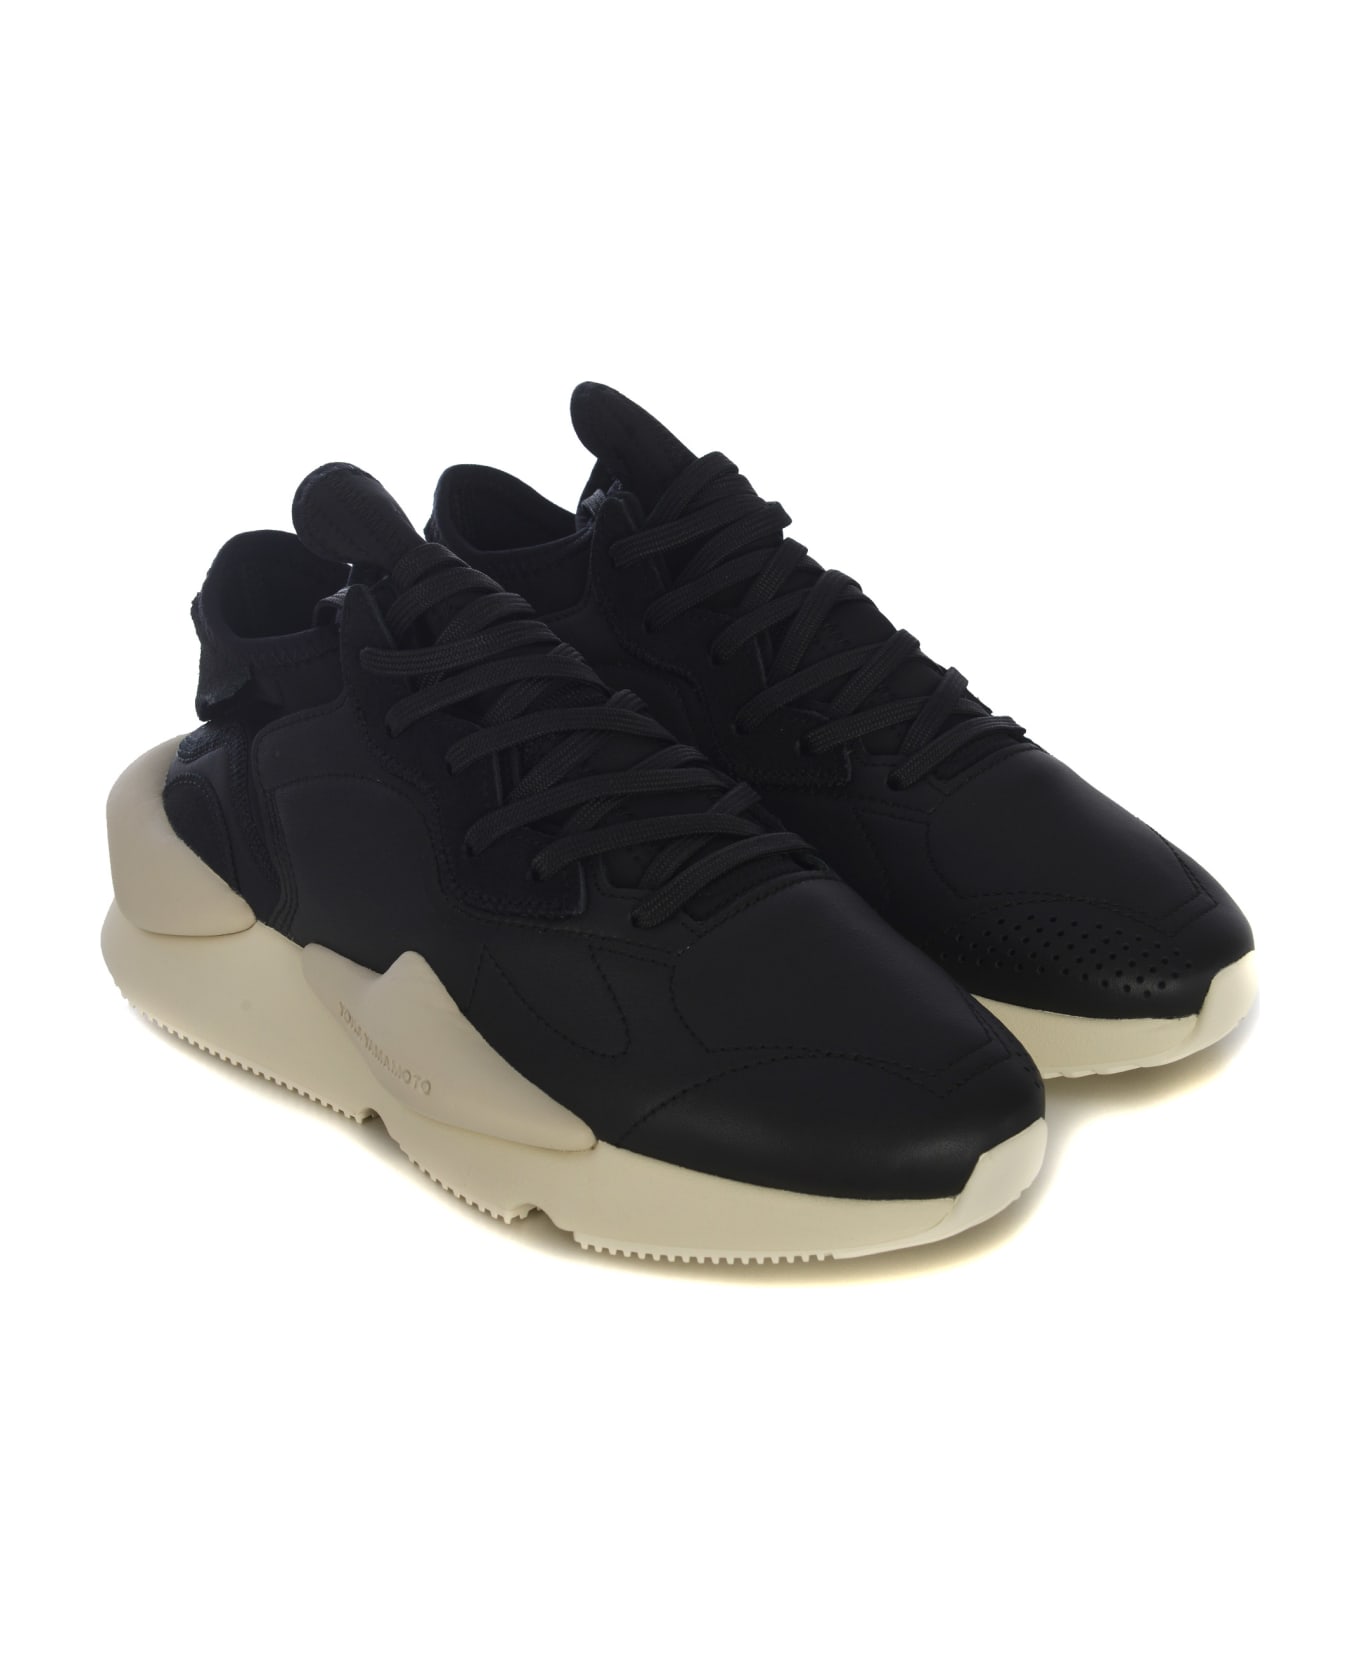 Y-3 Sneakers Y-3 "kaiwa" Made With Leather Upper - Nero